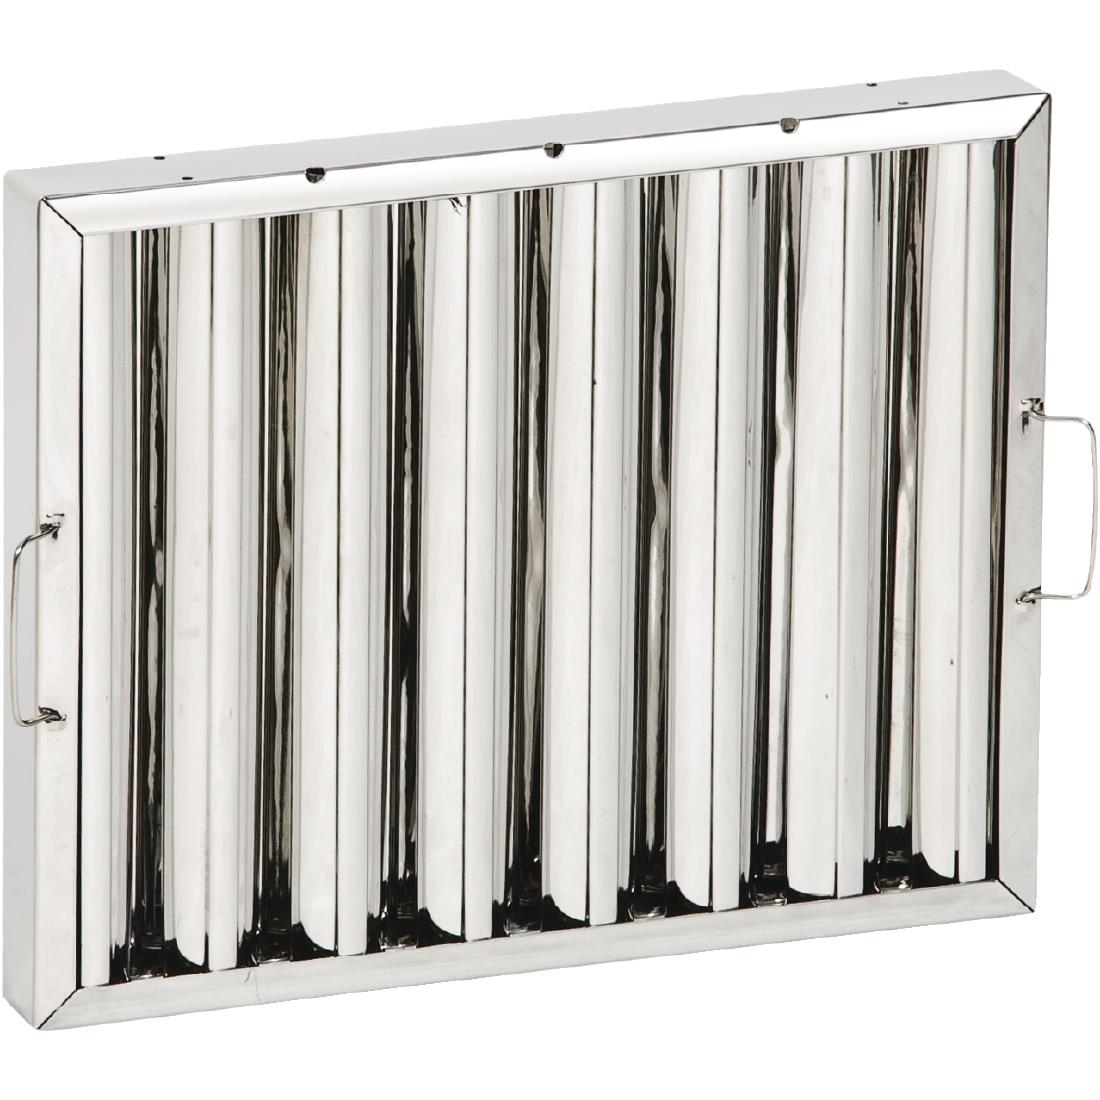 Kitchen Canopy Baffle Filter 400 x 400mm